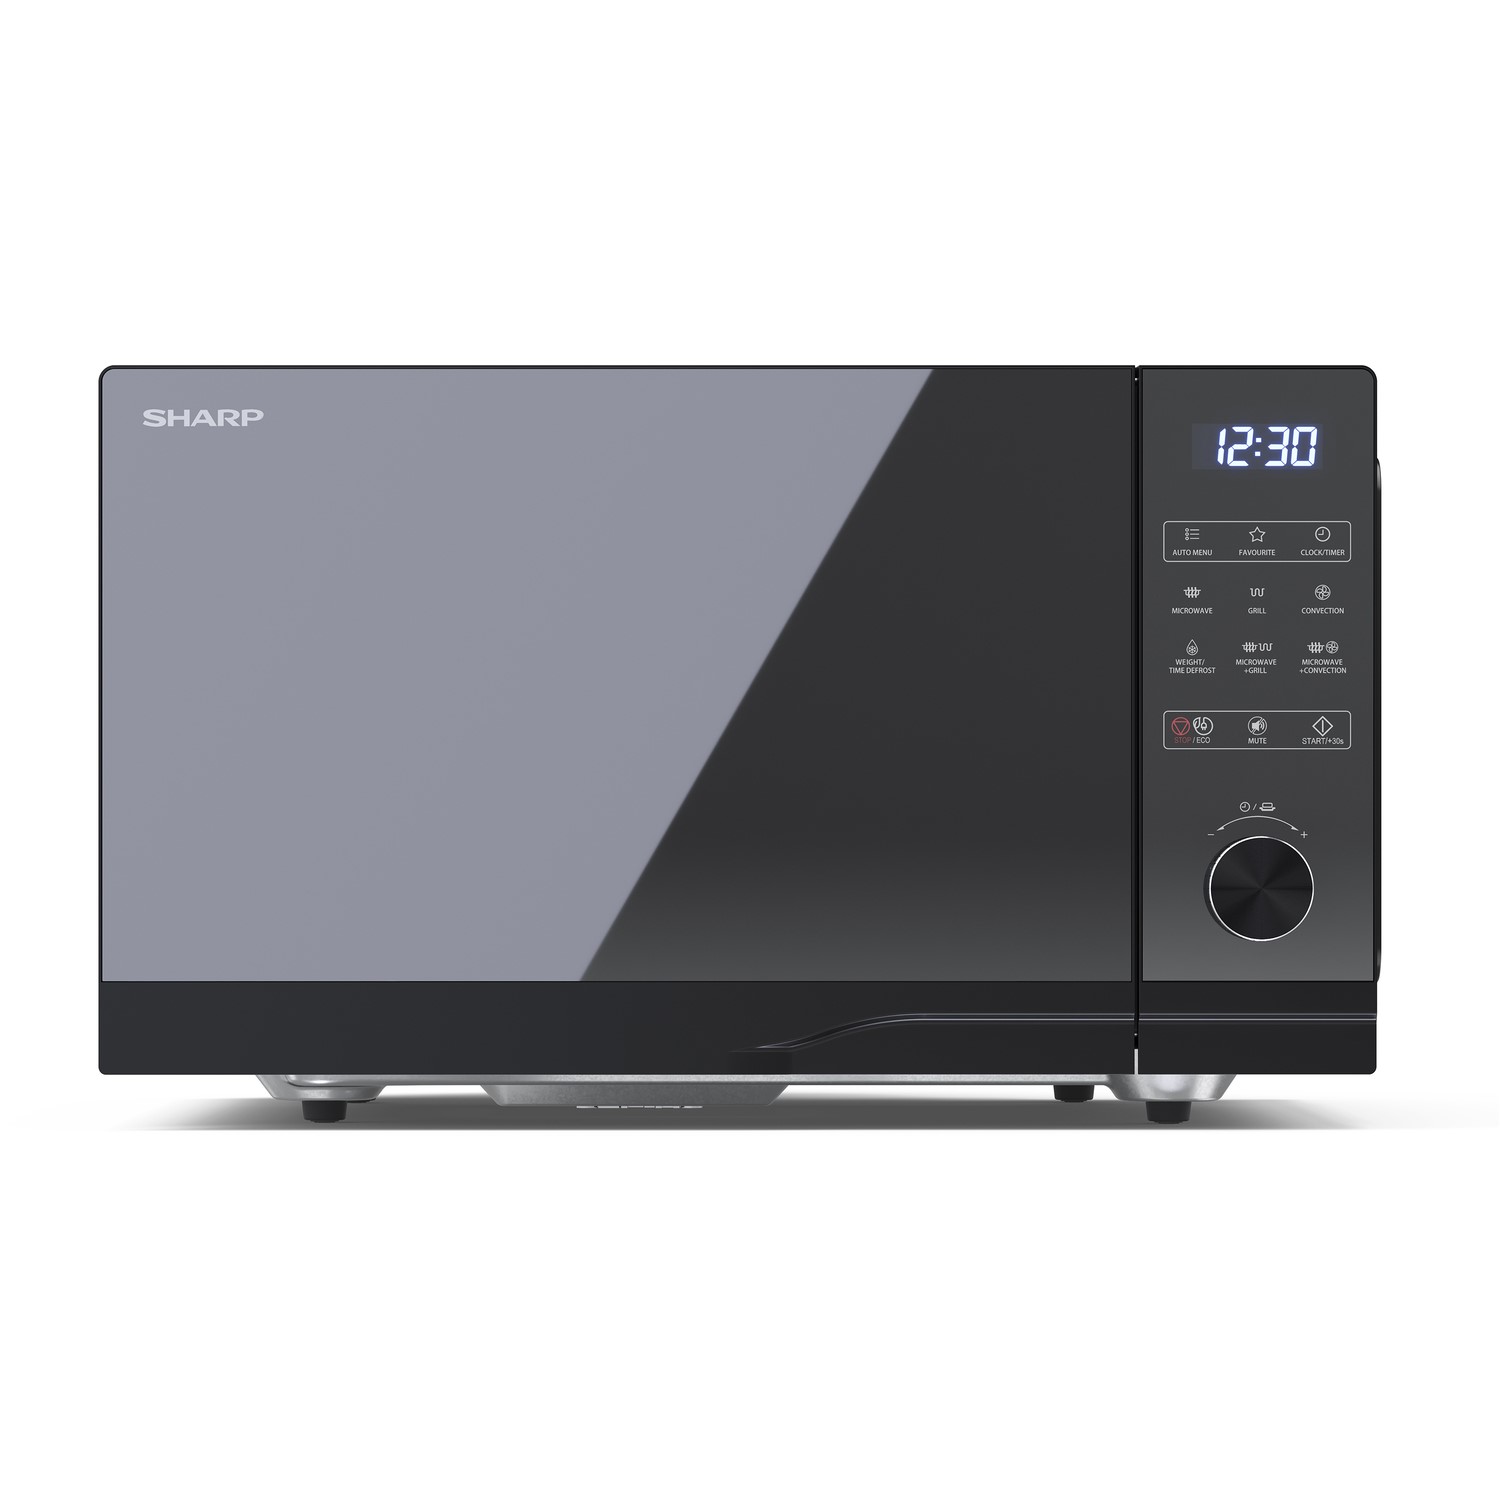 Photos - Other for Computer Sharp 25L 900W Digital Combination Flatbed Microwave - Black YC-GC52BU-B 